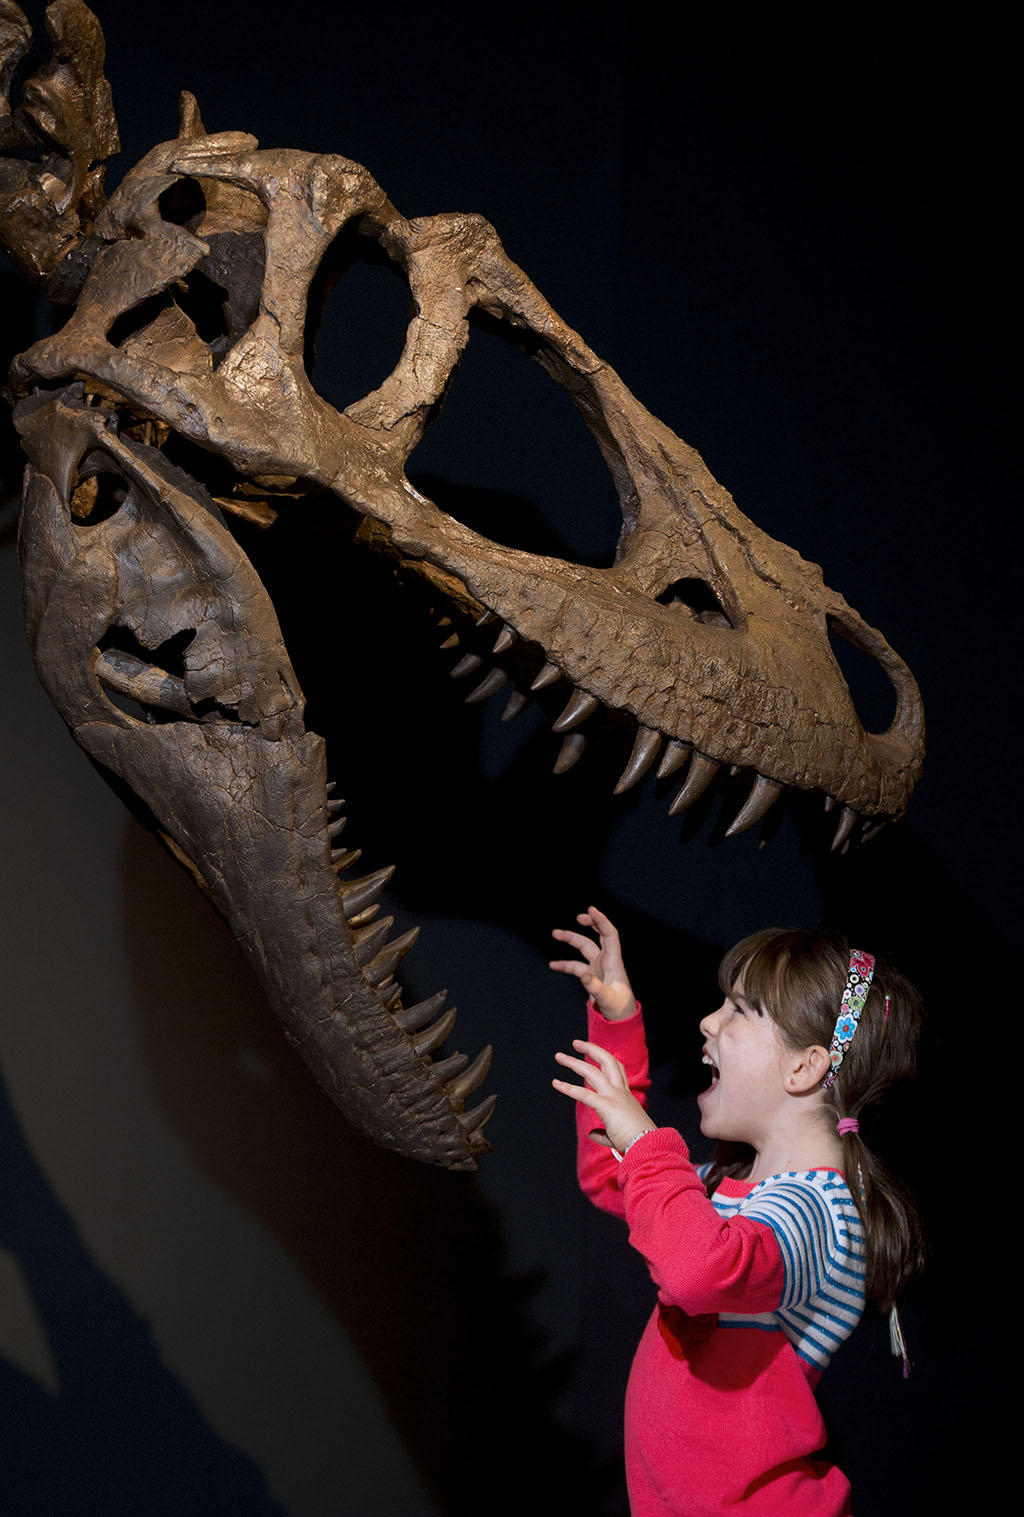 Rosa Connolly aged 10  comes face to face with a tyrannosaur (Photo: Neil Hanna) 